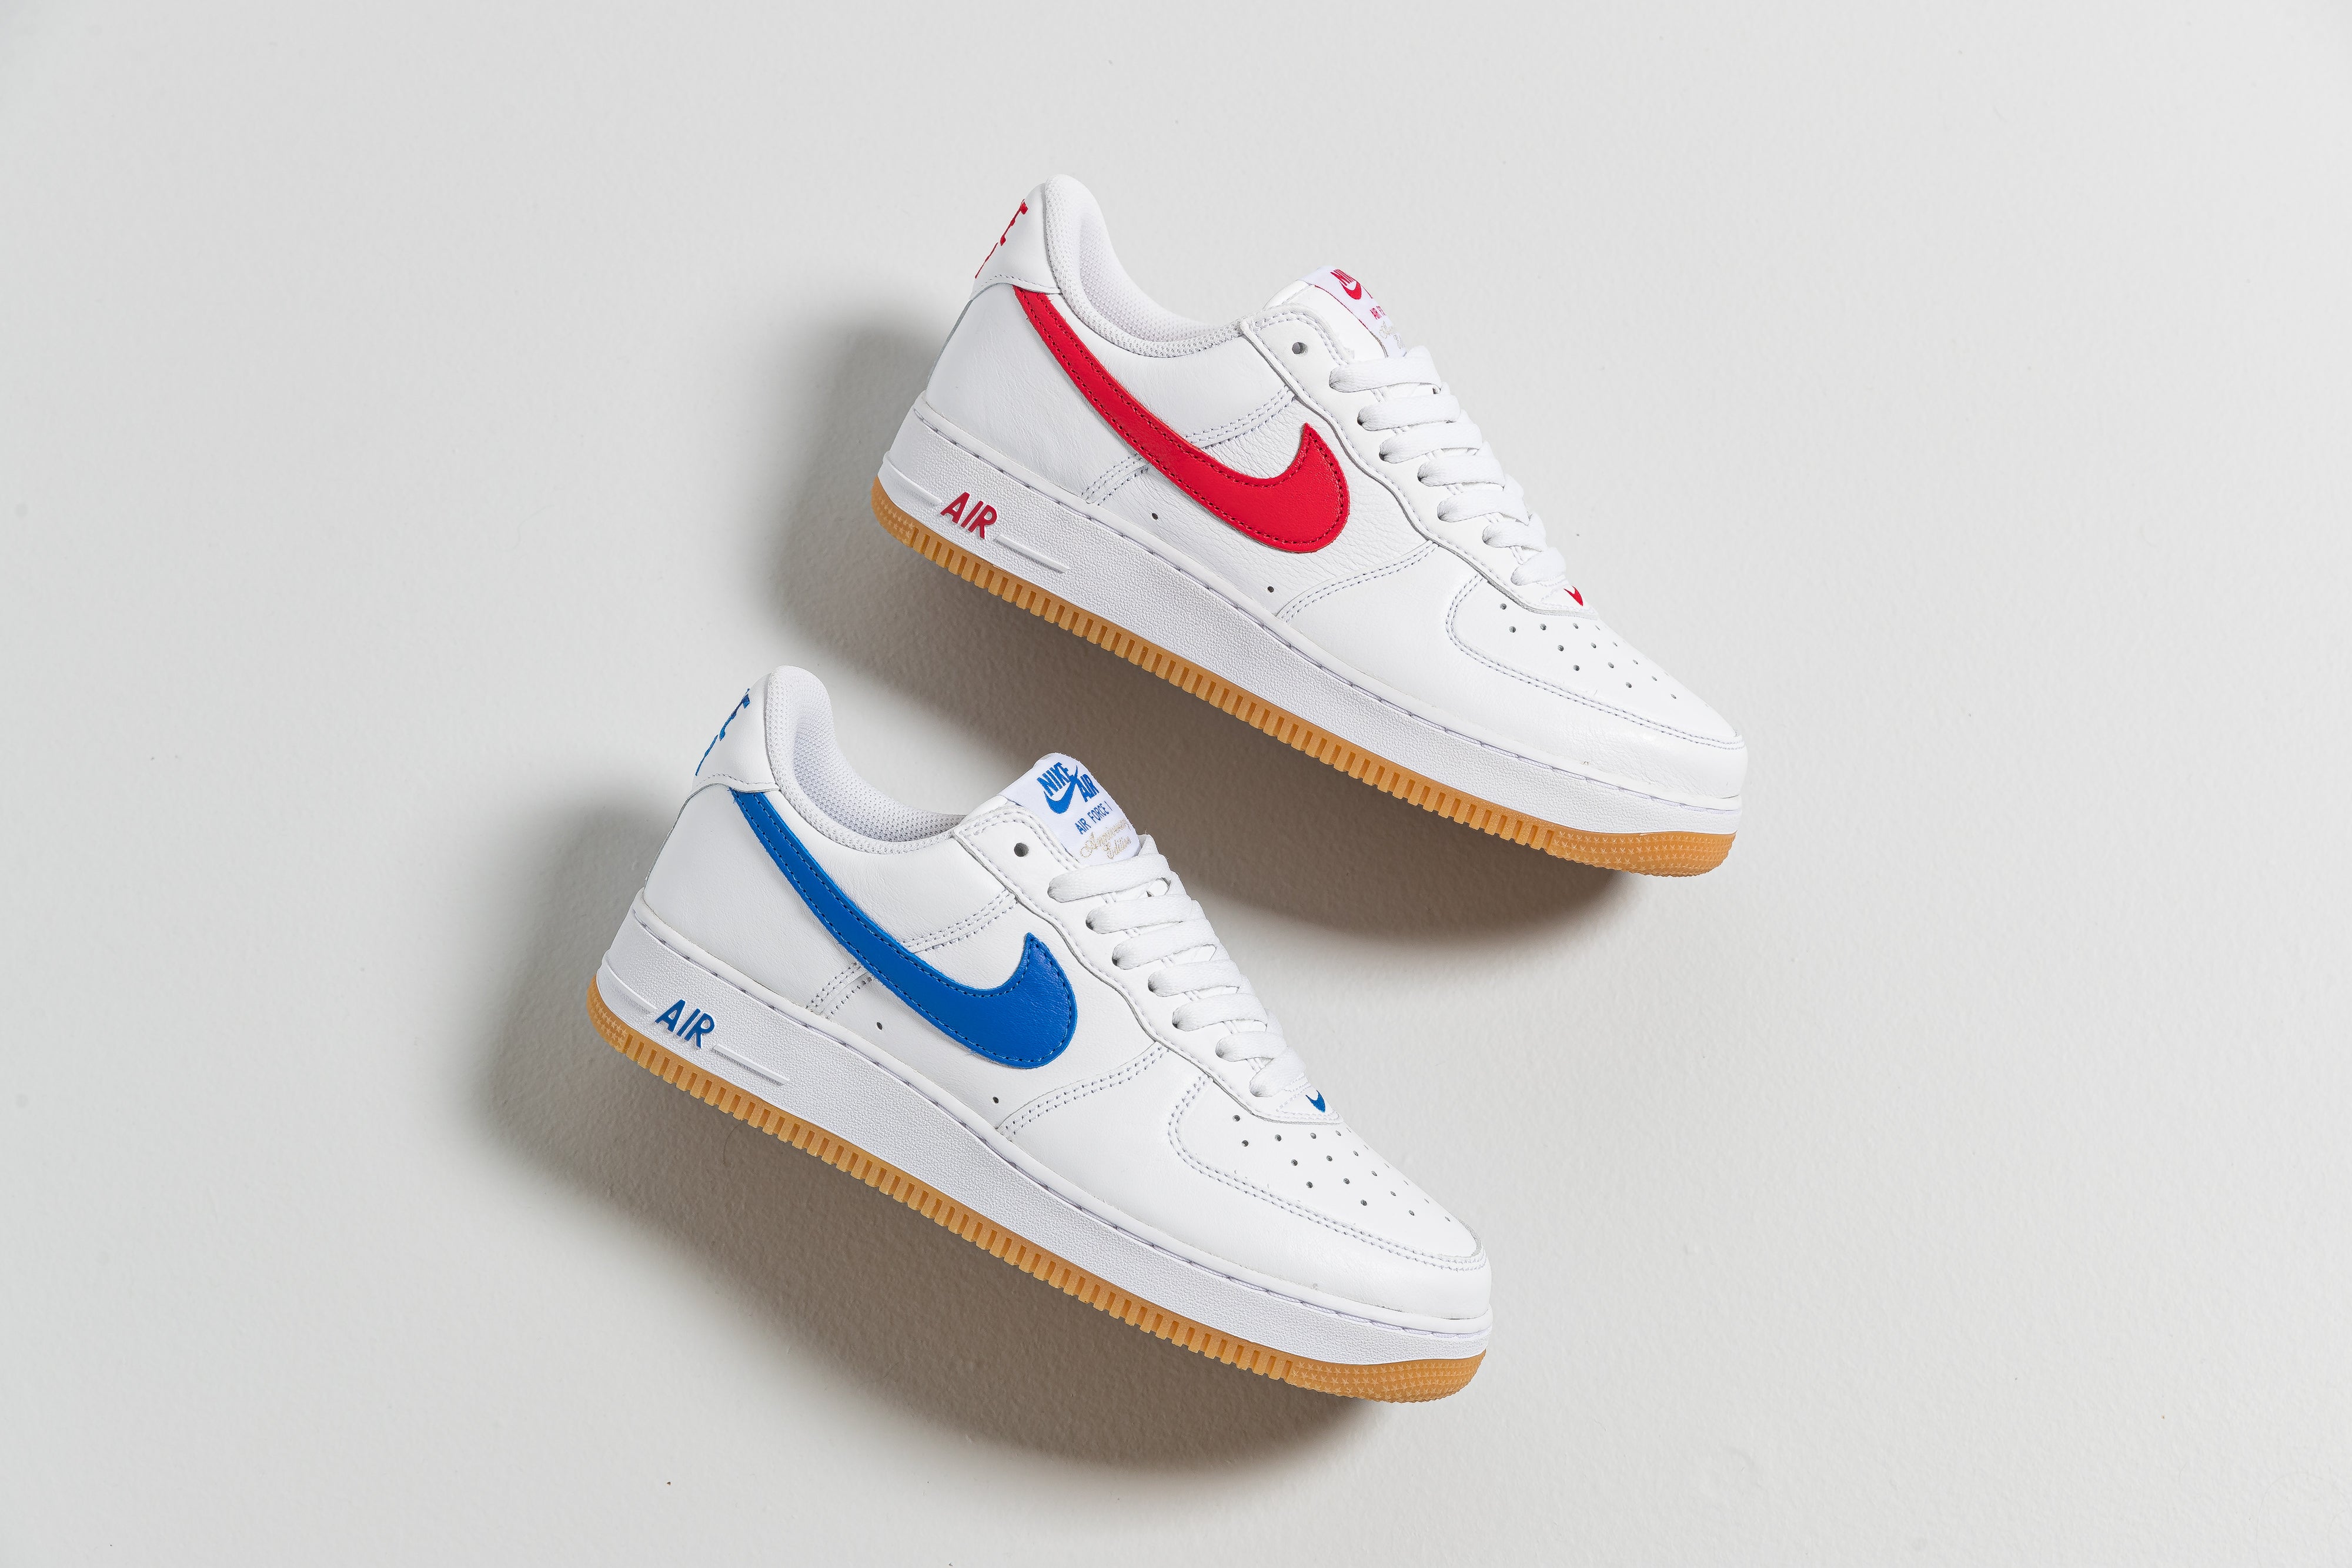 Nike Kick Off the Air Force 1 'Colour of the Month' Series with